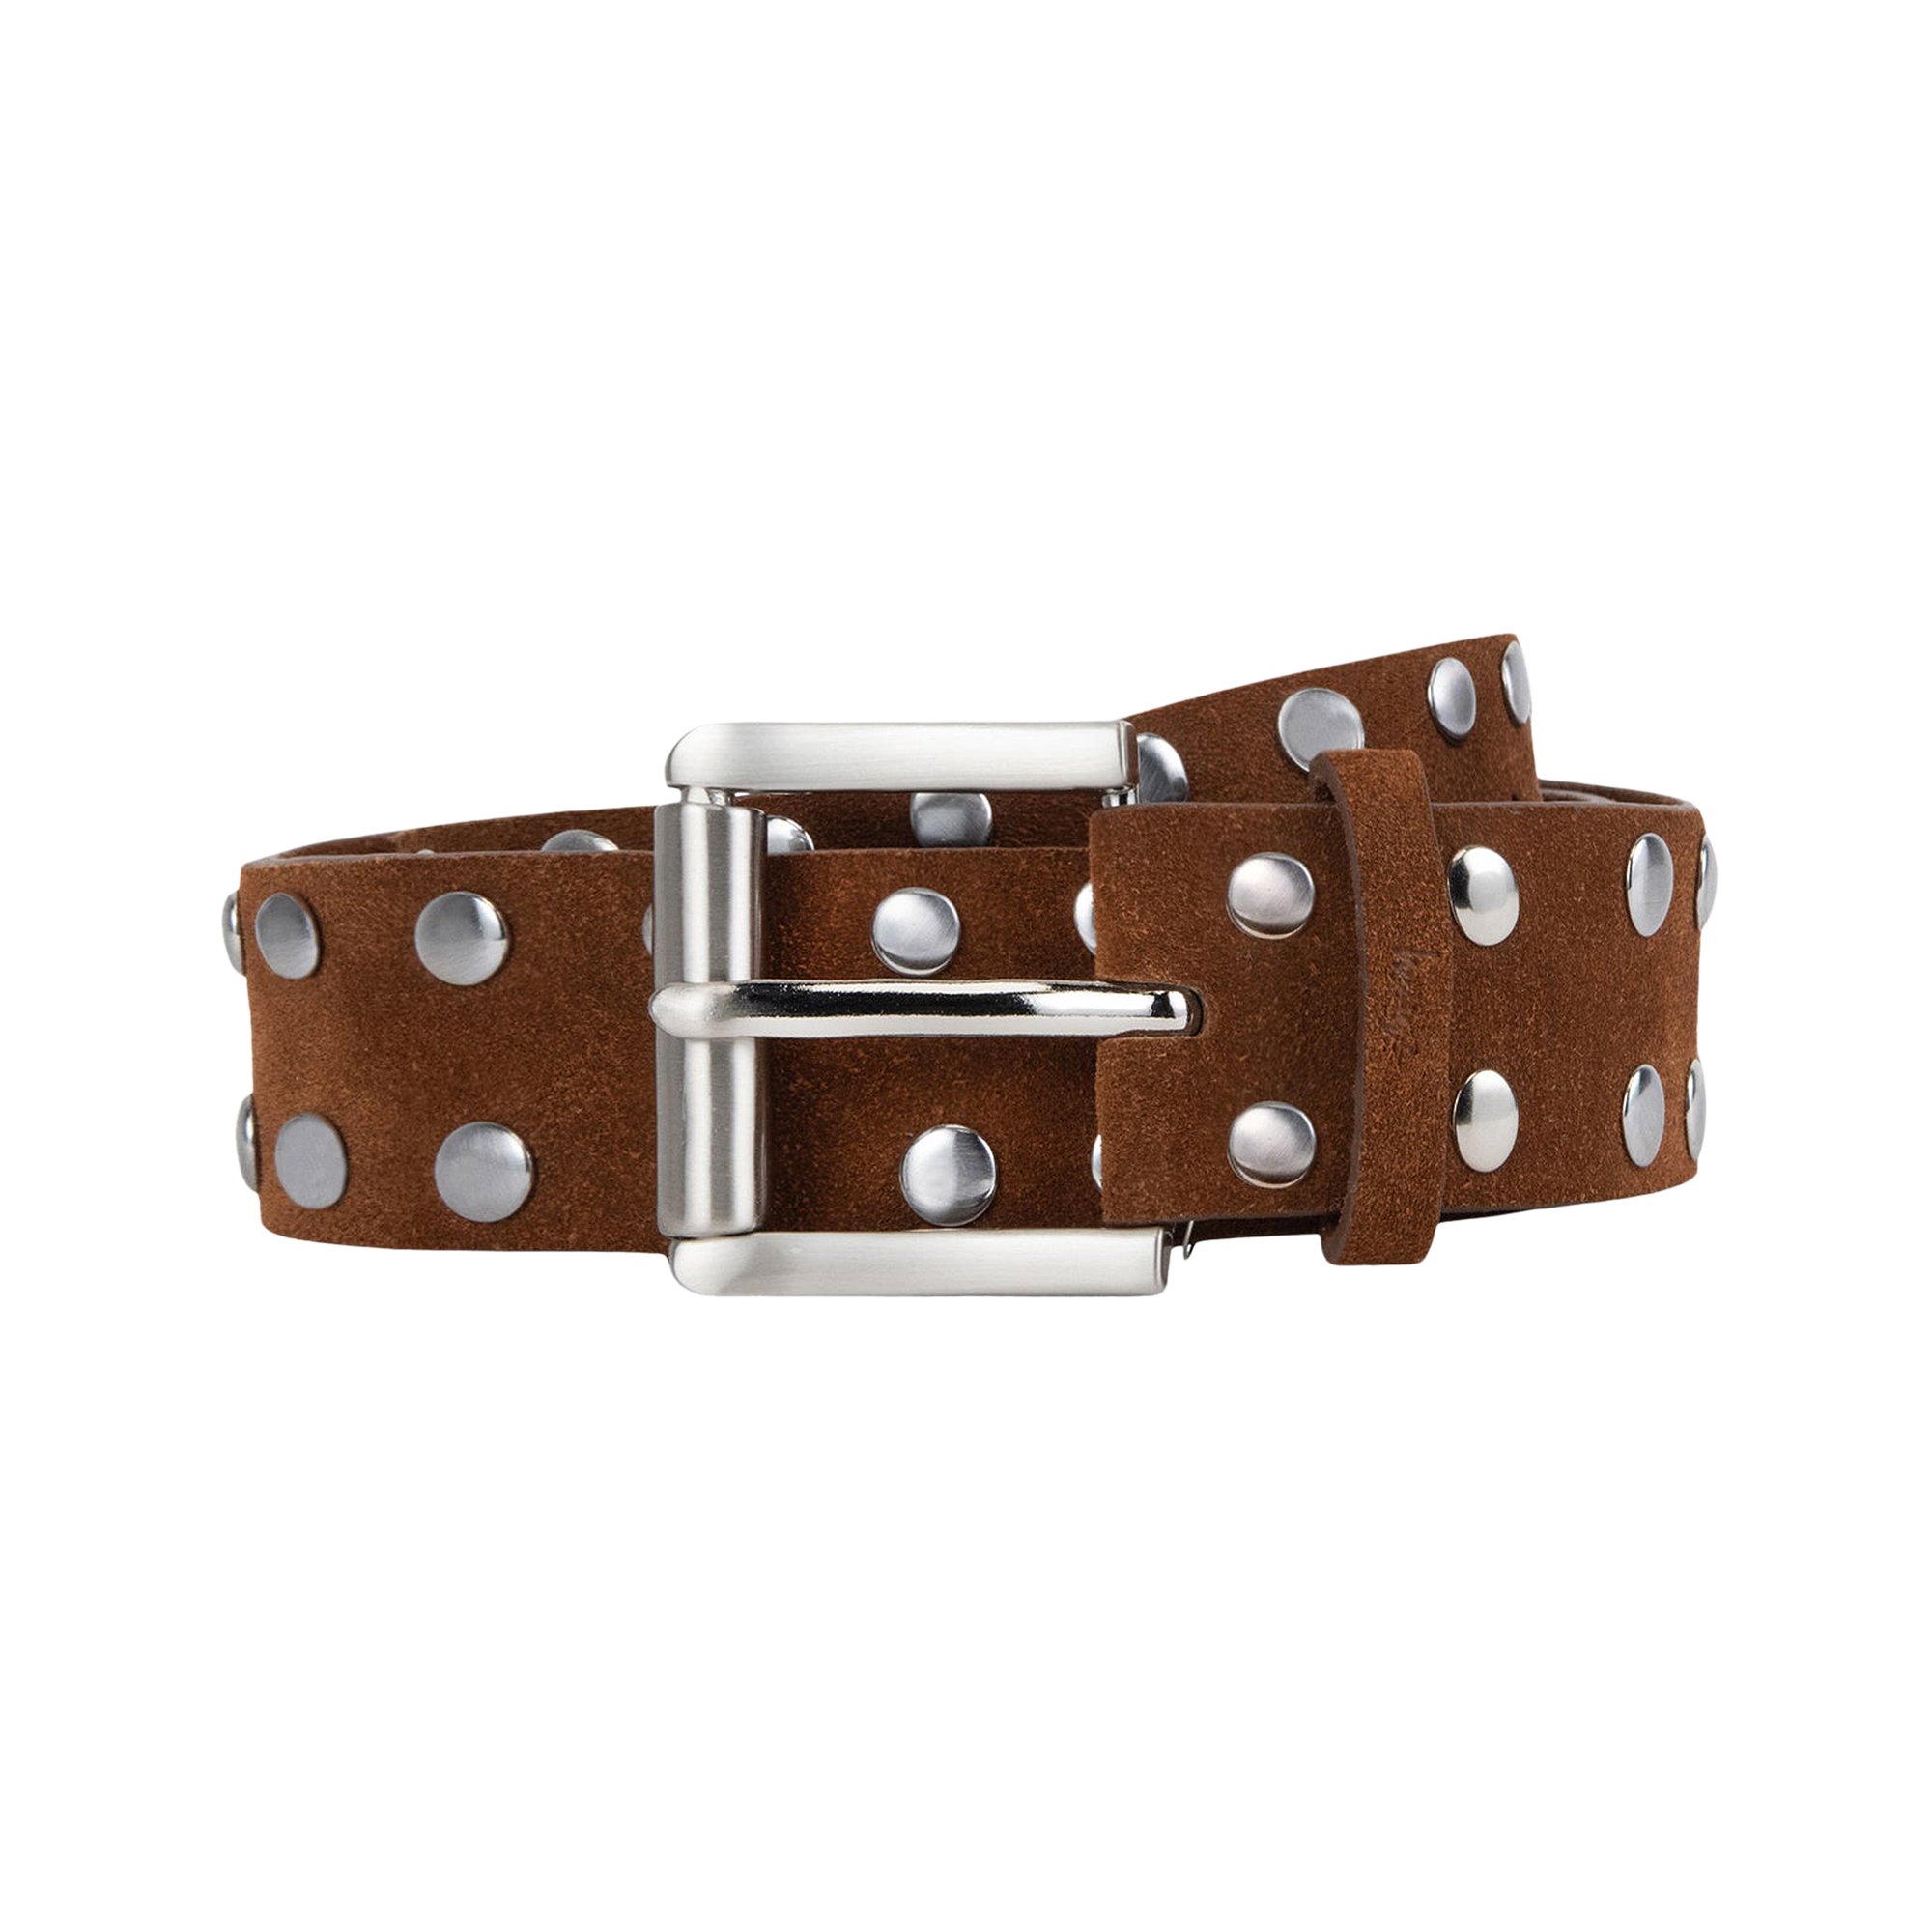 Buy Stussy 8 Ball Studded Belt 'Brown Suede' - 135184 BROW | GOAT